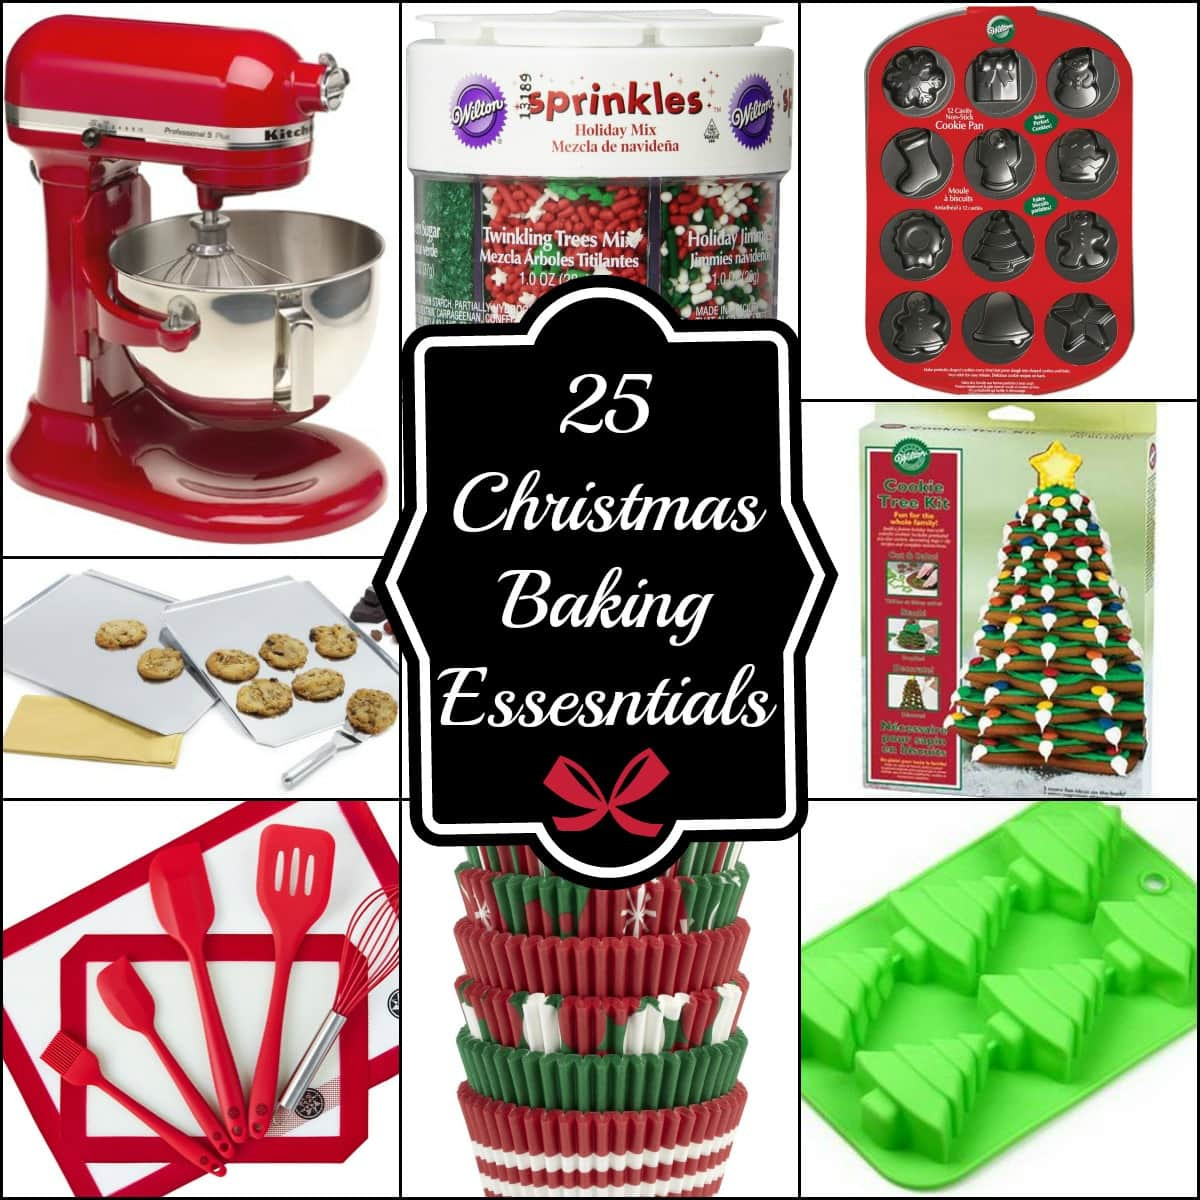 Holiday Baking Gift Ideas
 25 Christmas Baking Essentials and Baking Gift Ideas